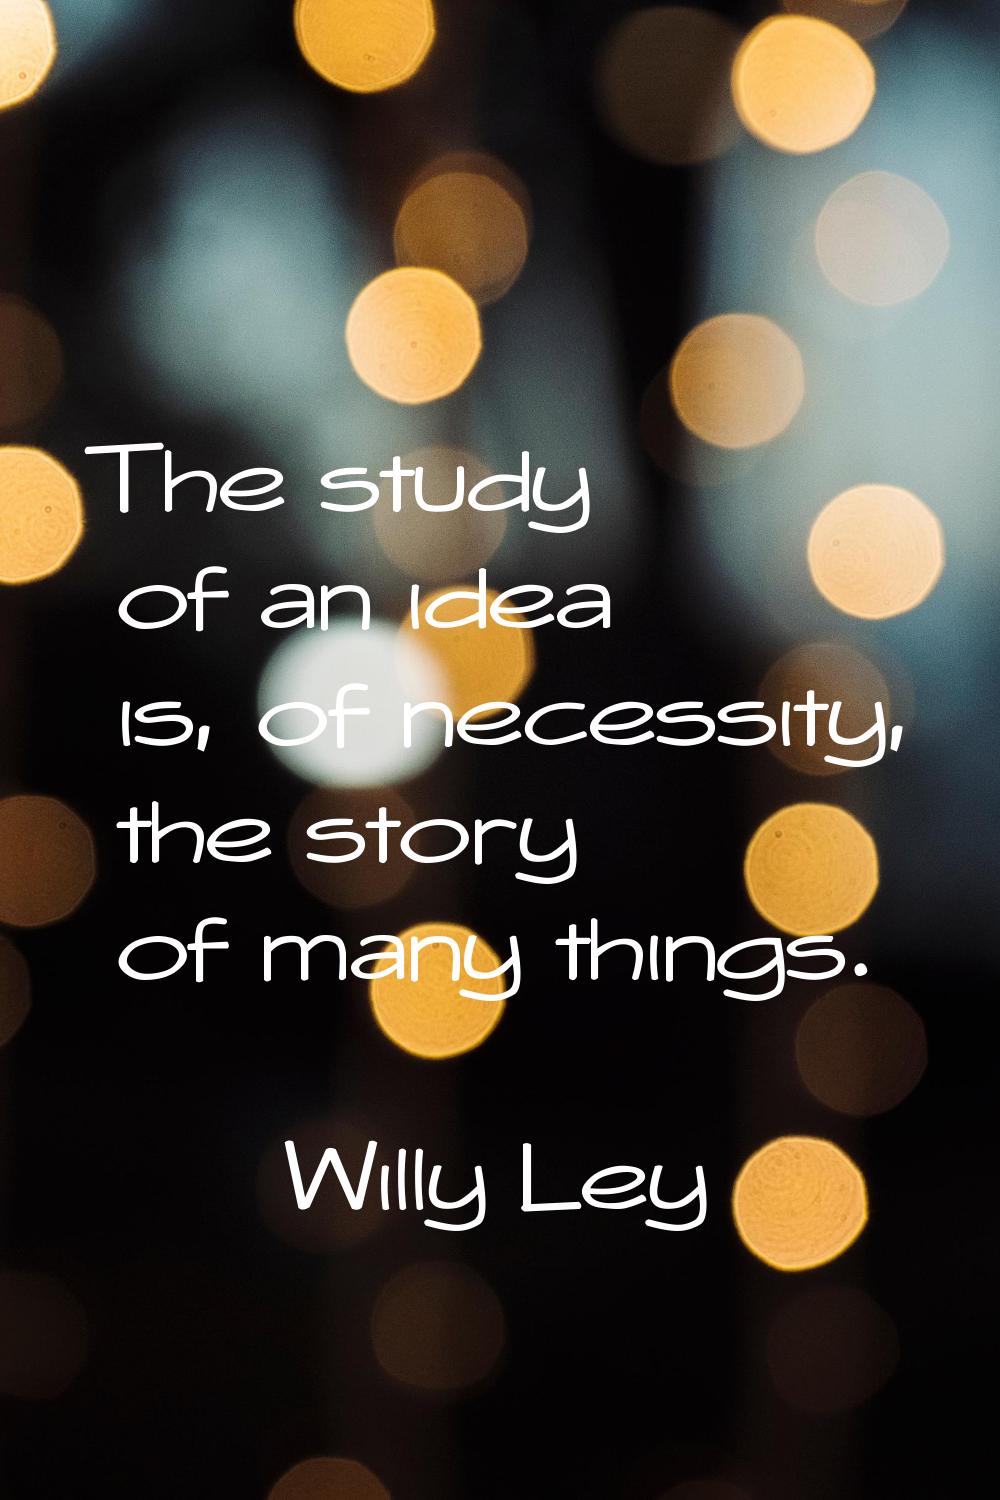 The study of an idea is, of necessity, the story of many things.